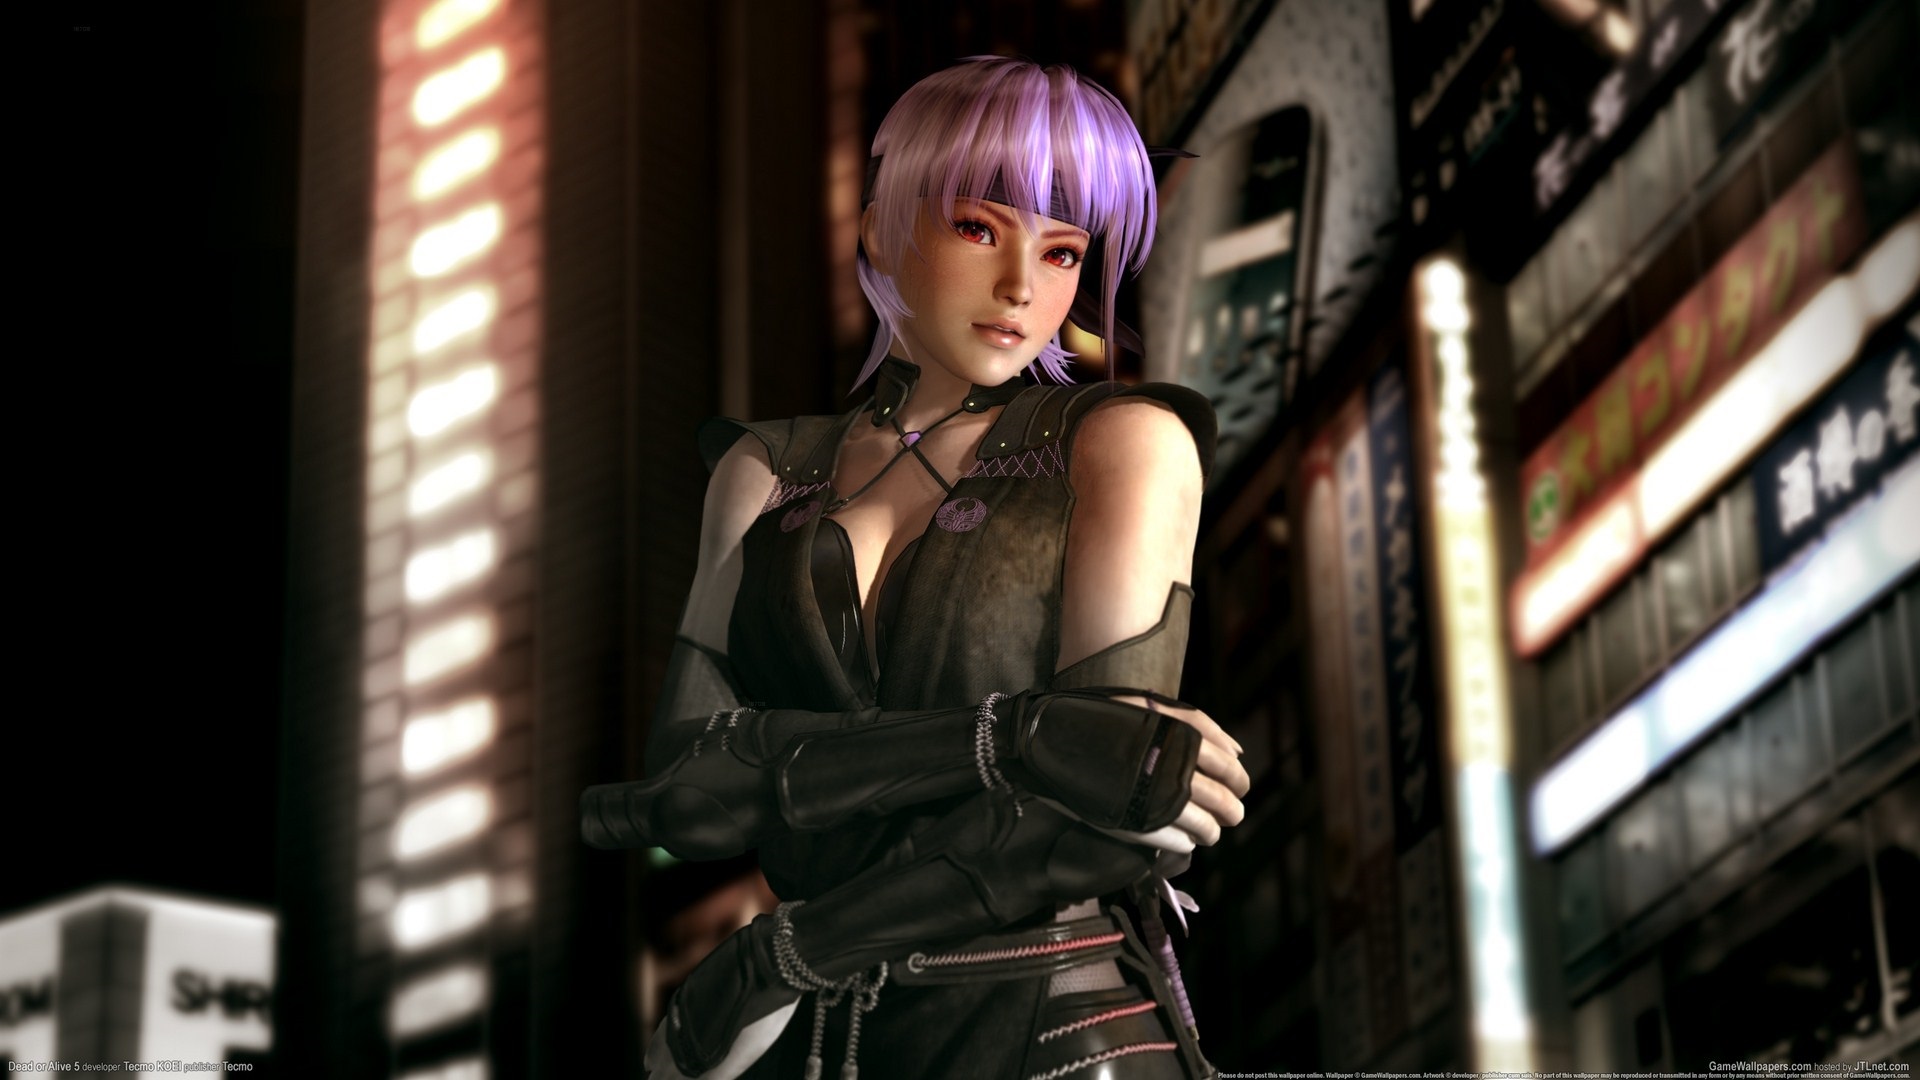 free download dead or alive 5 ultimate